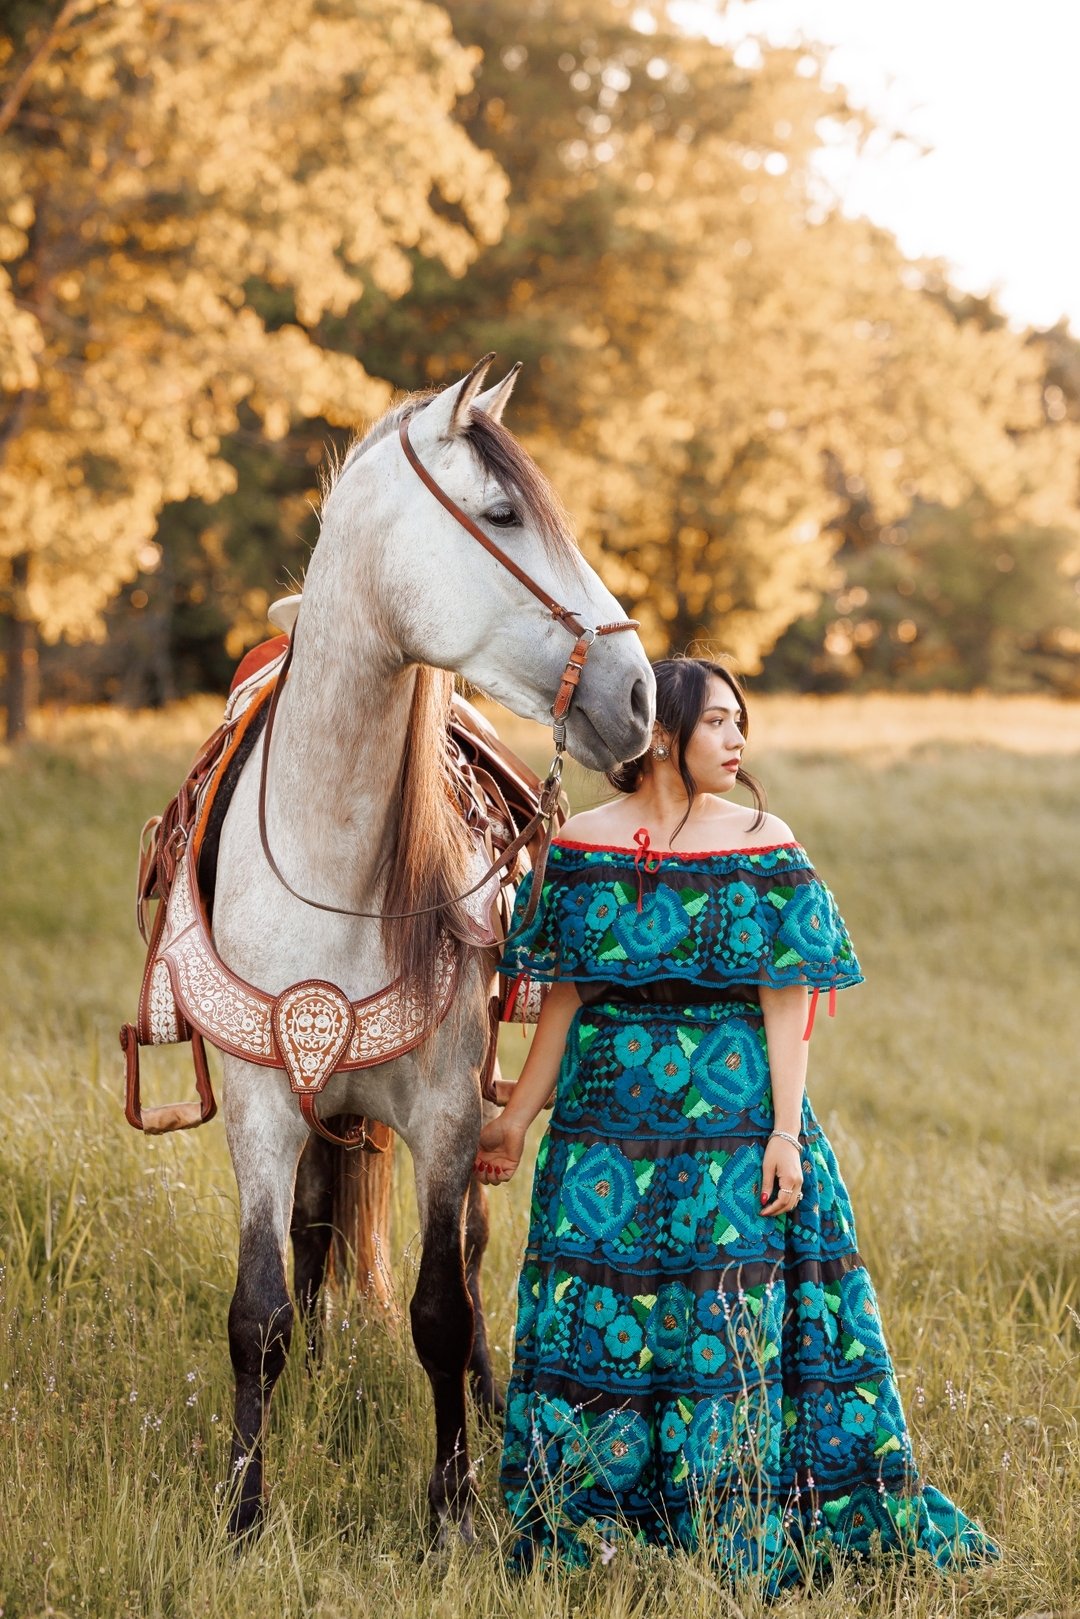 It's her royal highness, @elizabethescamillaa and her handsome prince.

--Elizabeth Gallegos and El Gal&aacute;n photographed in Royce City, Texas 

#dallasequestrian #dfwequestrian#equestrianphotographer #equestrianphotography #horsephotographer #da